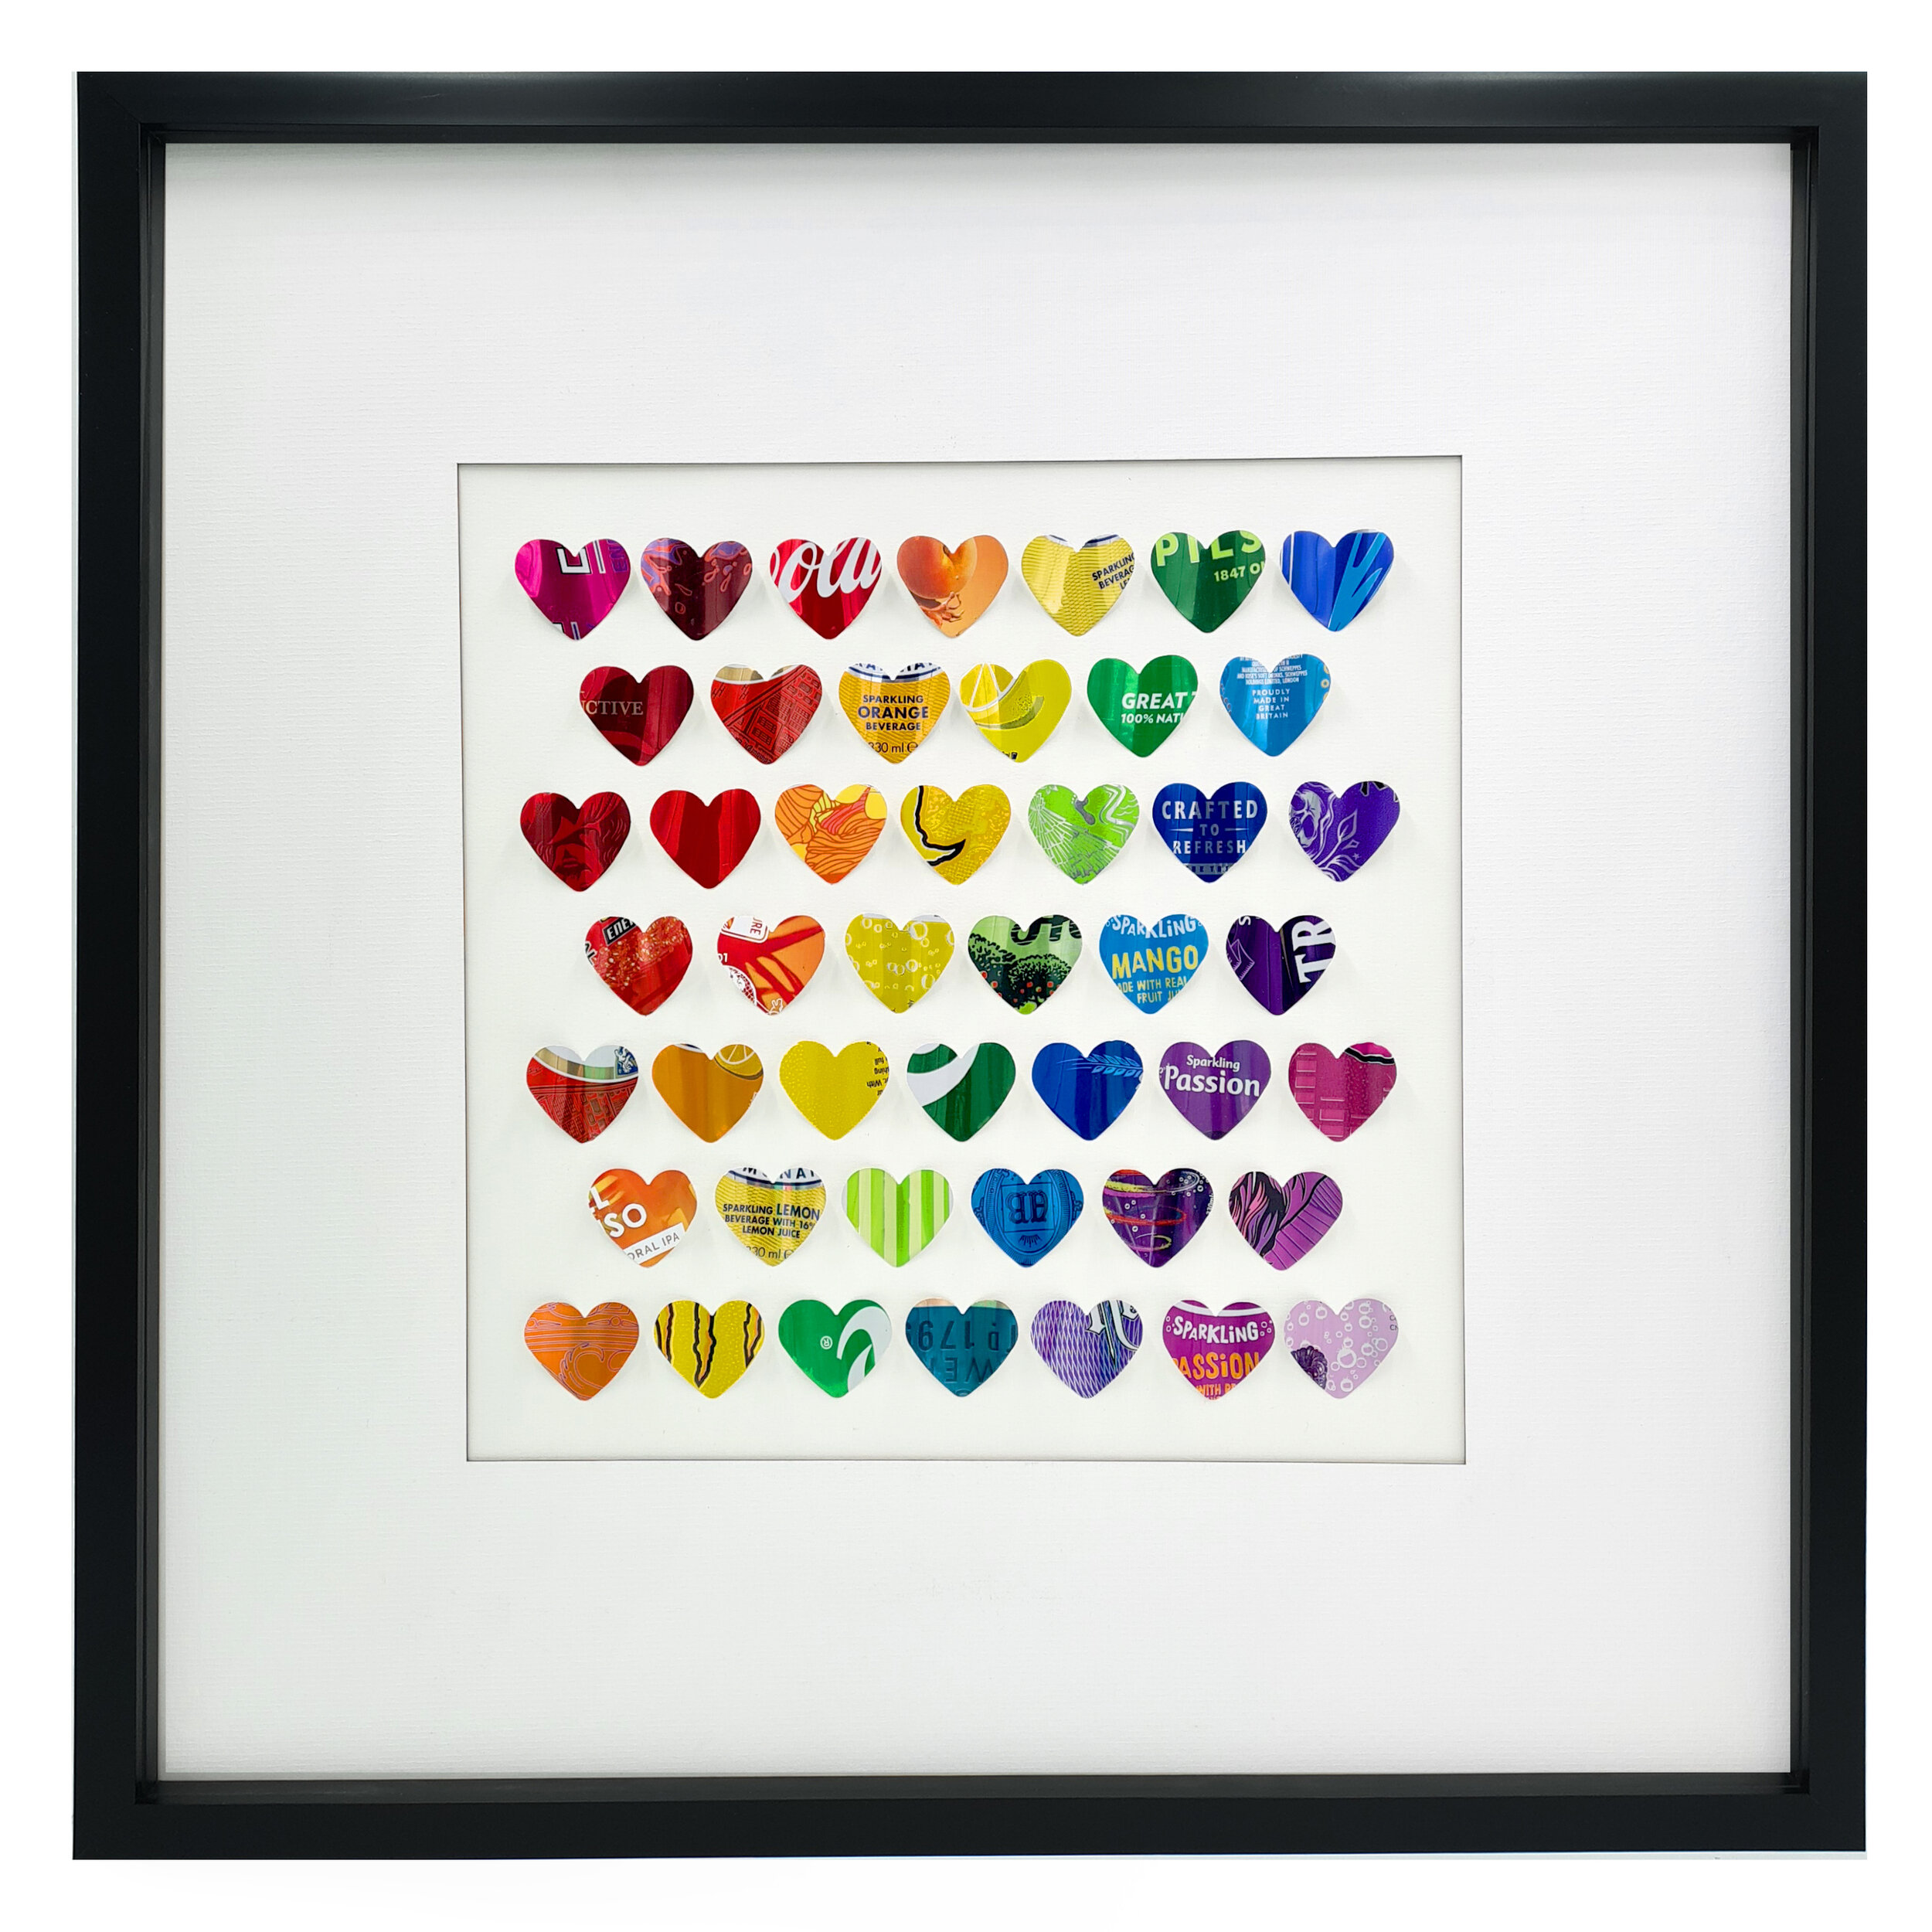 Rainbow Heart art made from recycled materials